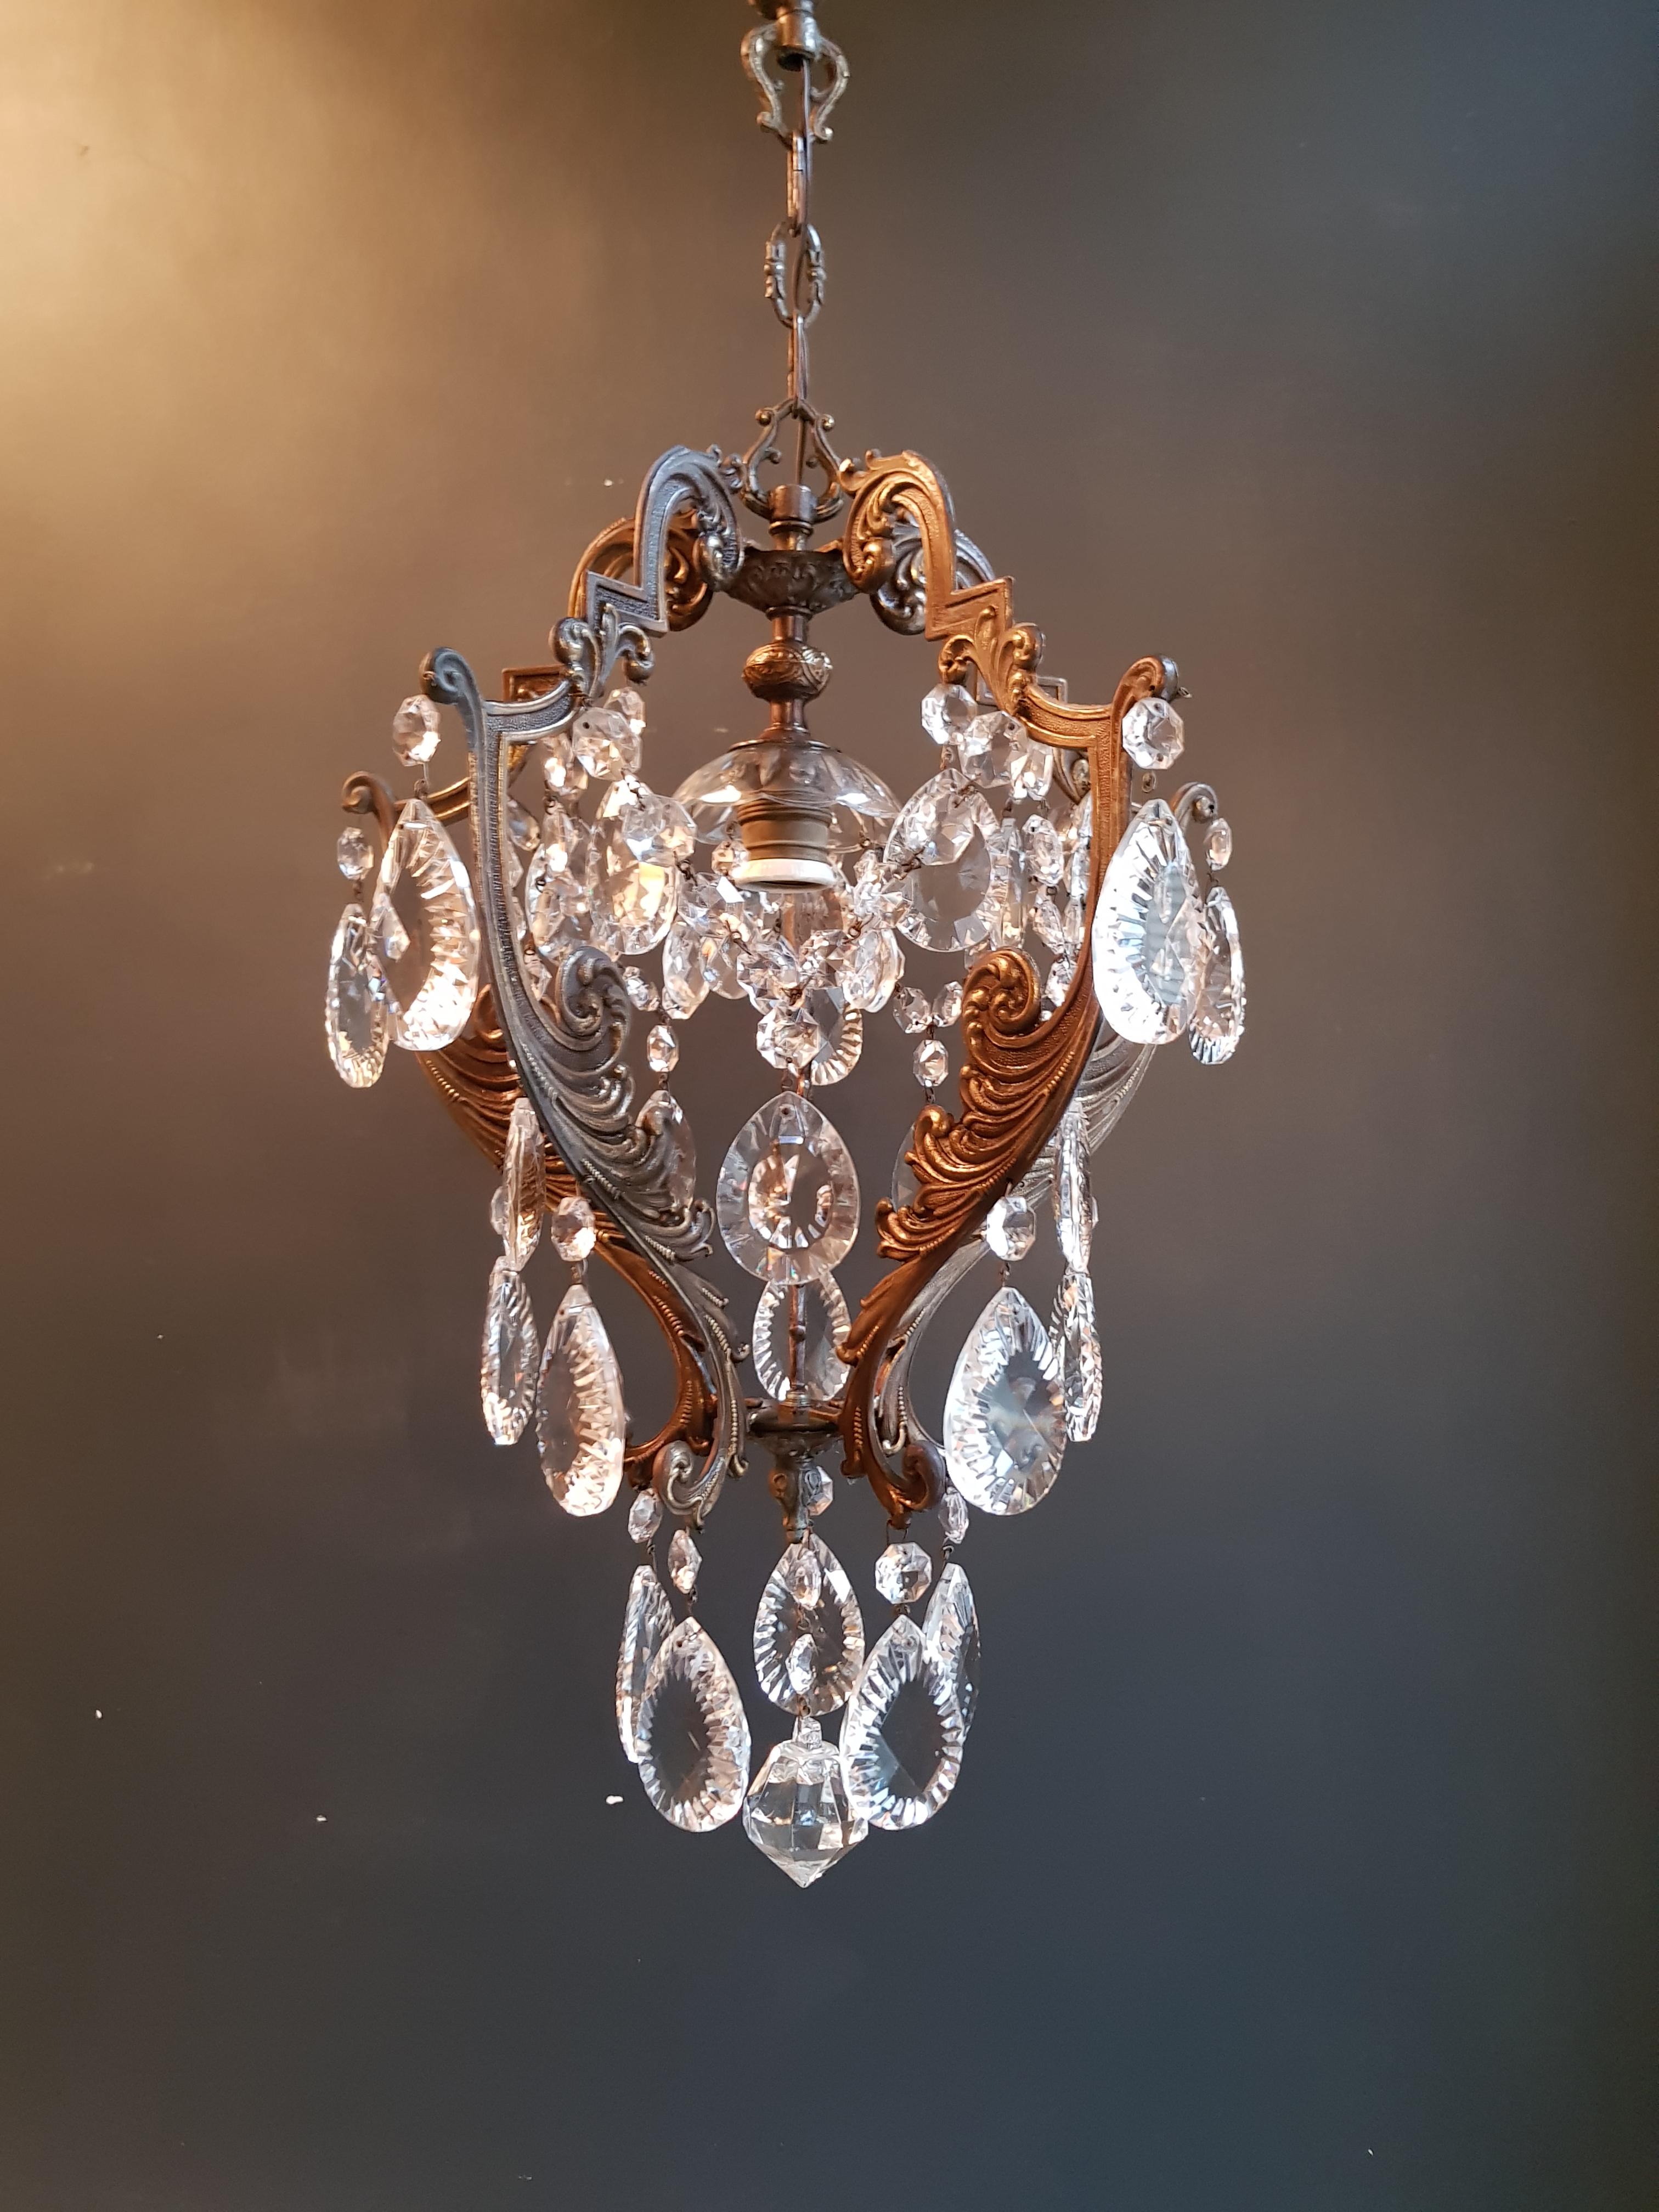 Original preserved chandelier, circa 1940. Cabling and sockets completely renewed. Crystal hand knotted
Measures: Total height: 99 cm, height without chain: 58 cm, diameter 38 cm, weight (approximately) 4 kg.

Number of lights: One-light bulb